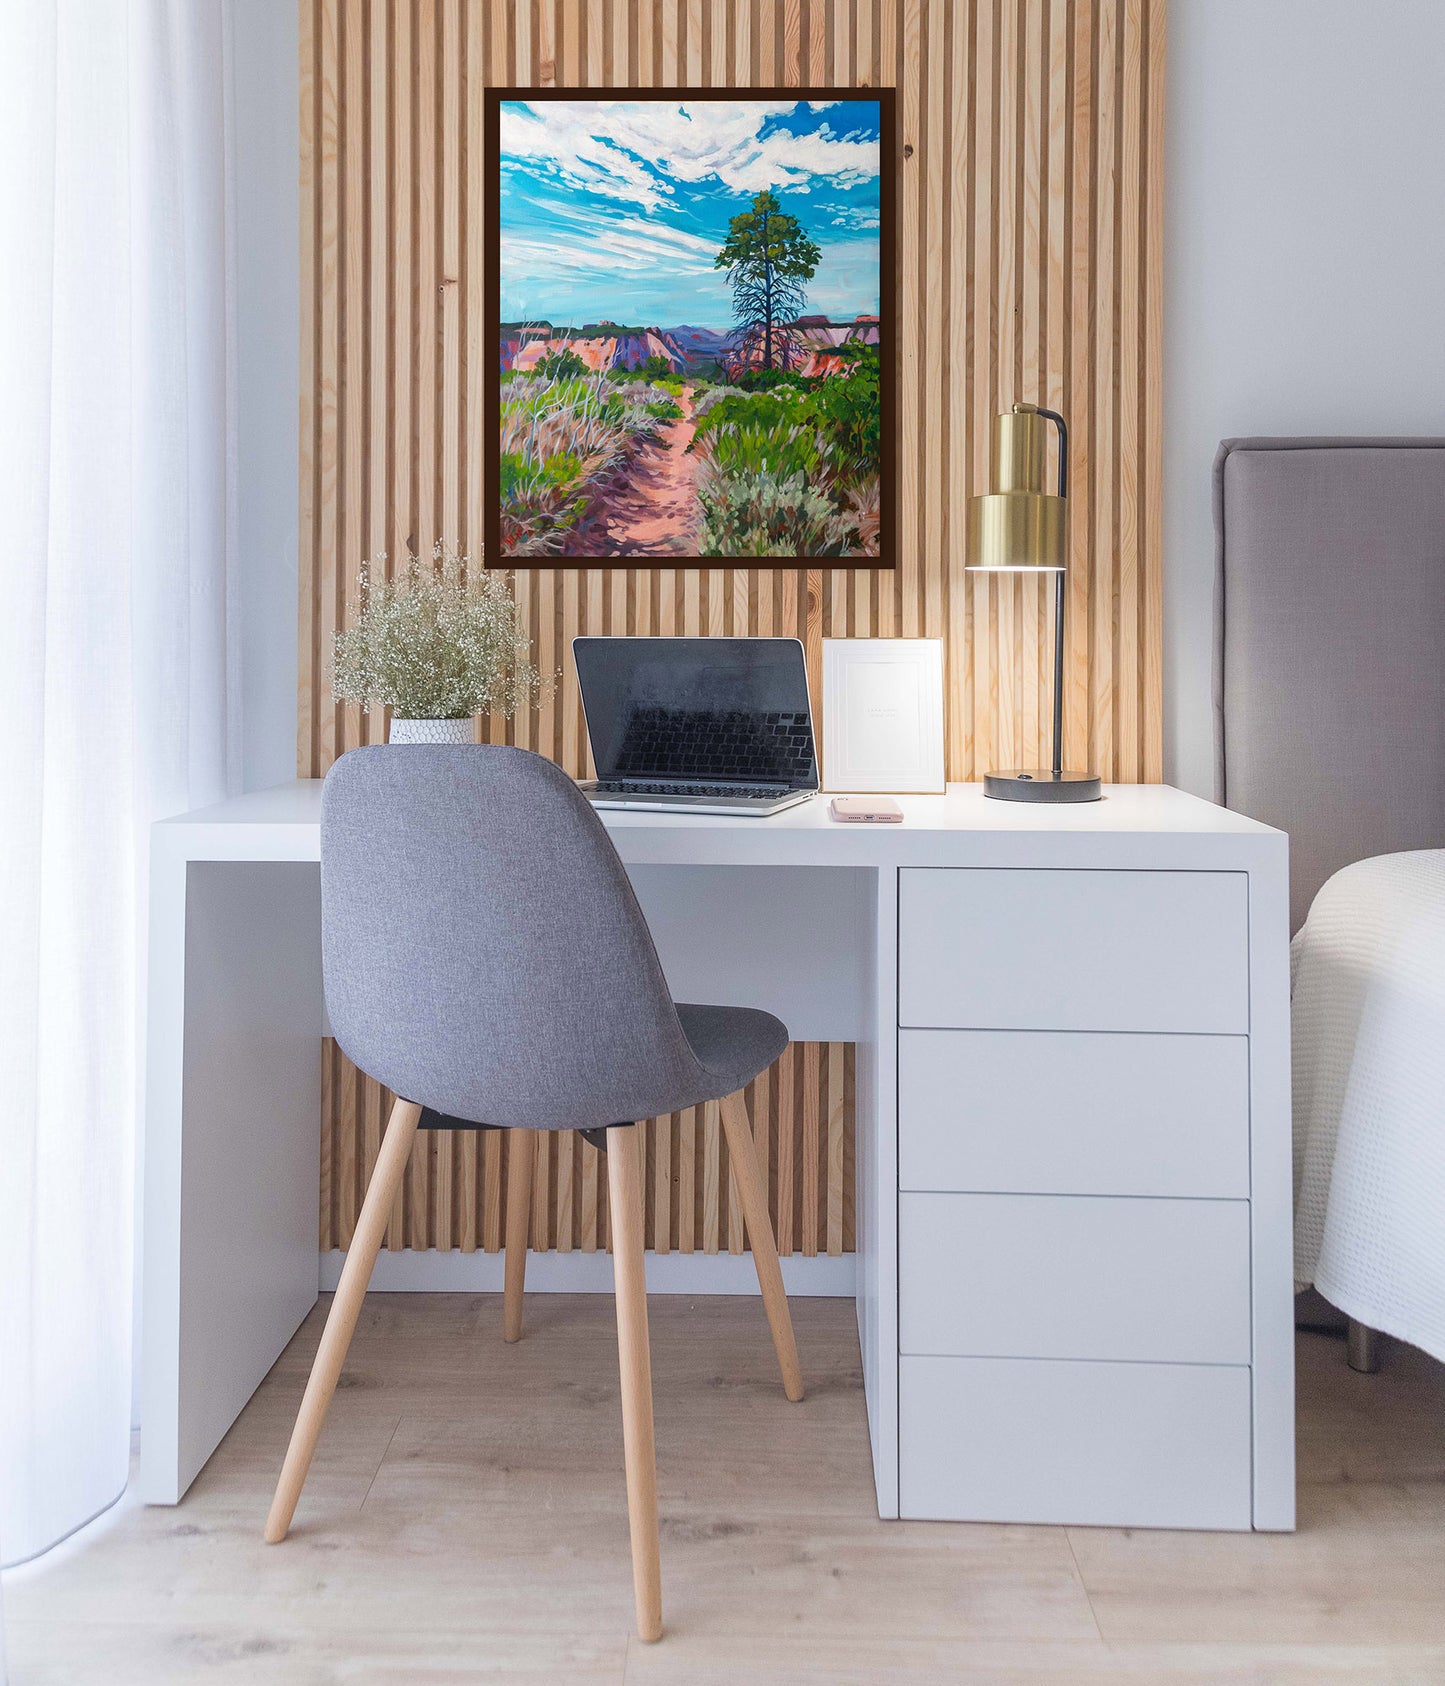 Painting of Zion National Park in bedroom office setting